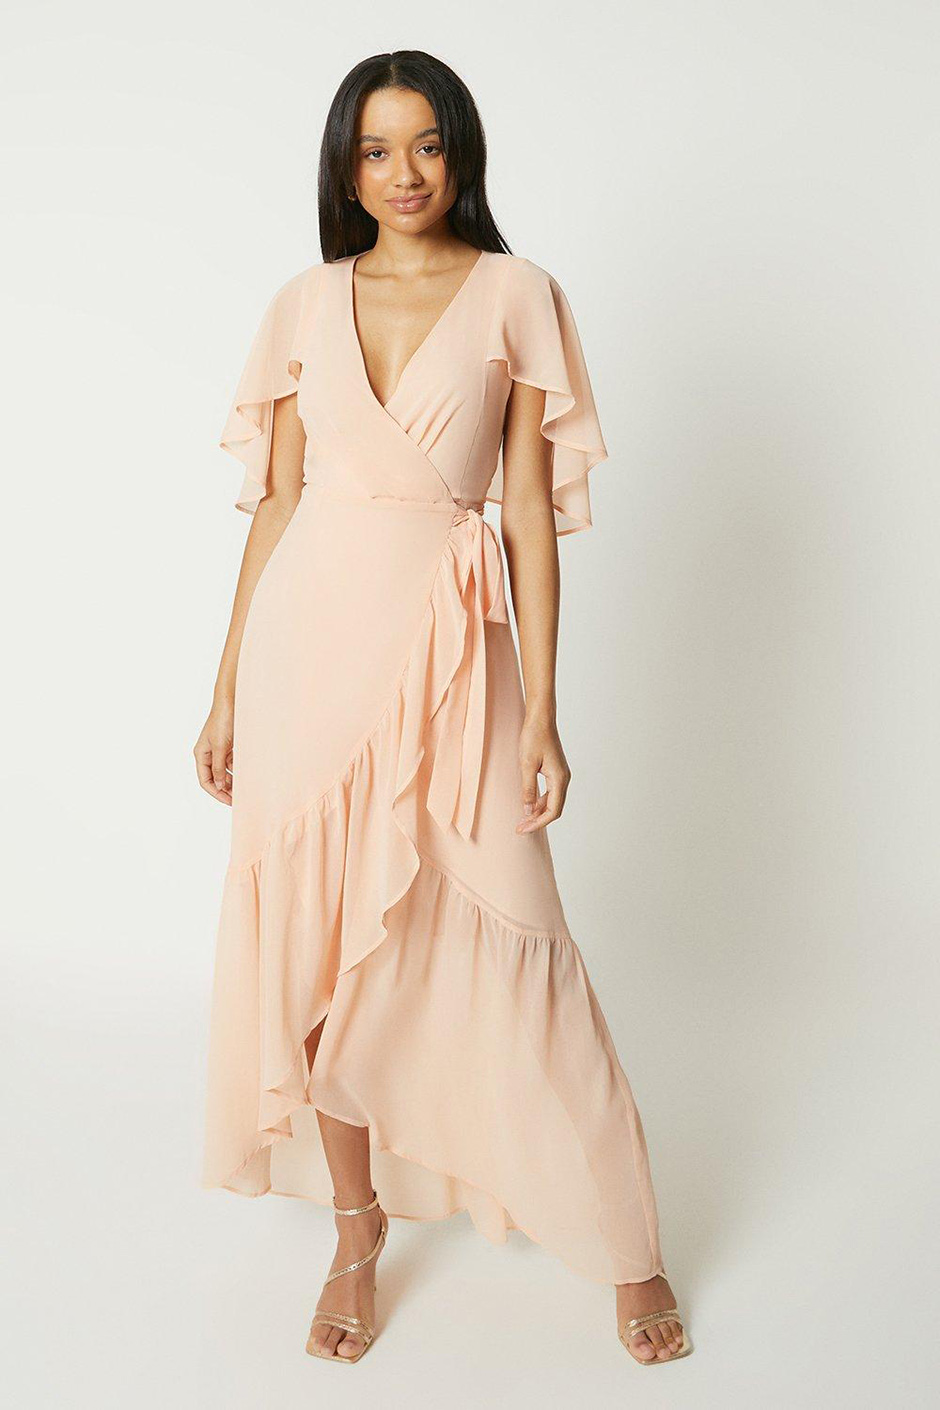 Peach bridesmaid dress with ruffle hem and cape sleeves from Debut London